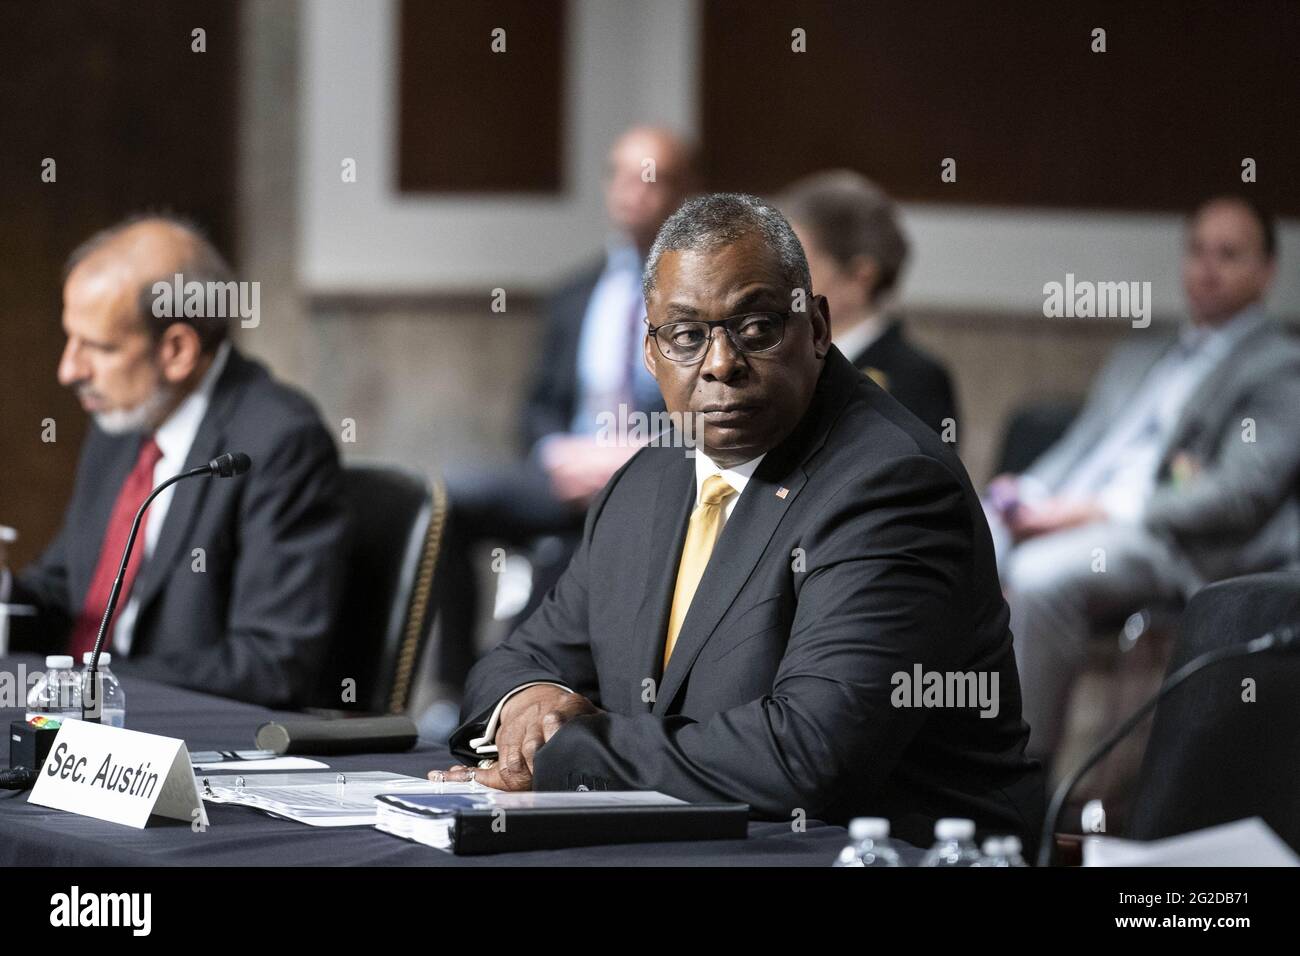 https://c8.alamy.com/comp/2G2DB71/washington-united-states-10th-june-2021-us-secretary-of-defense-general-lloyd-austin-testifies-before-the-senate-armed-services-committee-at-the-us-capitol-in-washington-dc-on-thursday-june-10-2021-the-committee-heard-testimony-the-defensedepartment-budget-posture-in-review-of-the-defense-authorization-request-for-fy2022-photo-by-sarah-silbigerupi-credit-upialamy-live-news-2G2DB71.jpg